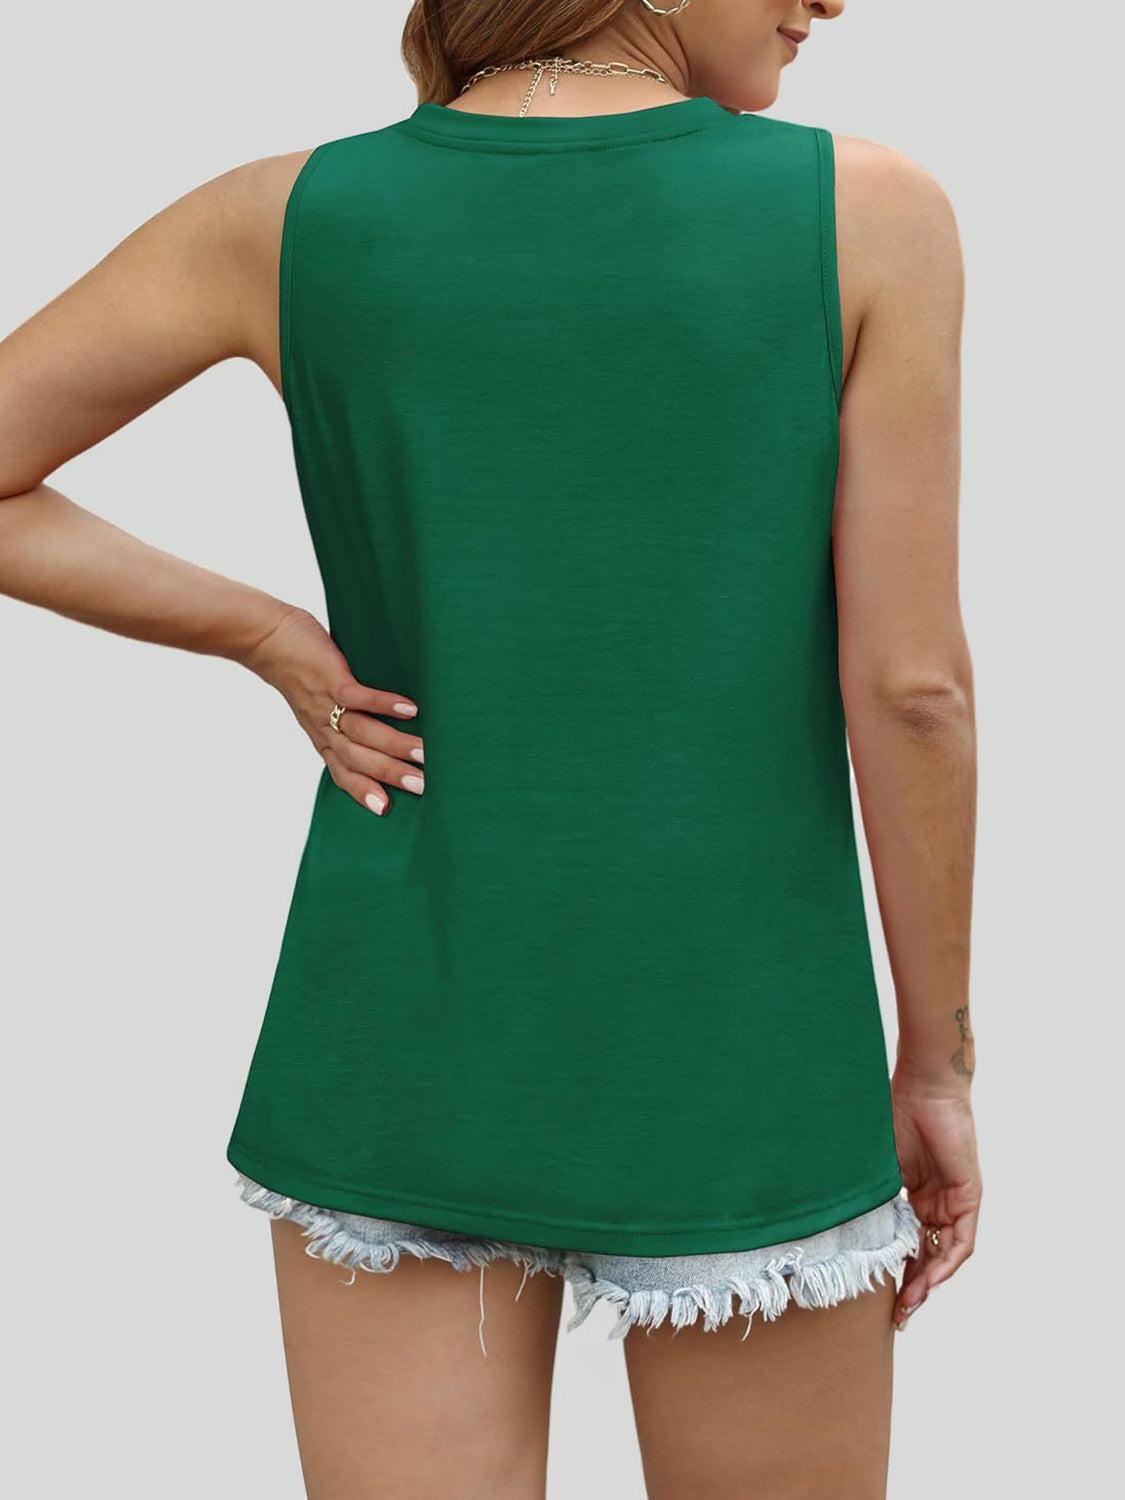 a woman wearing a green top with fray shorts